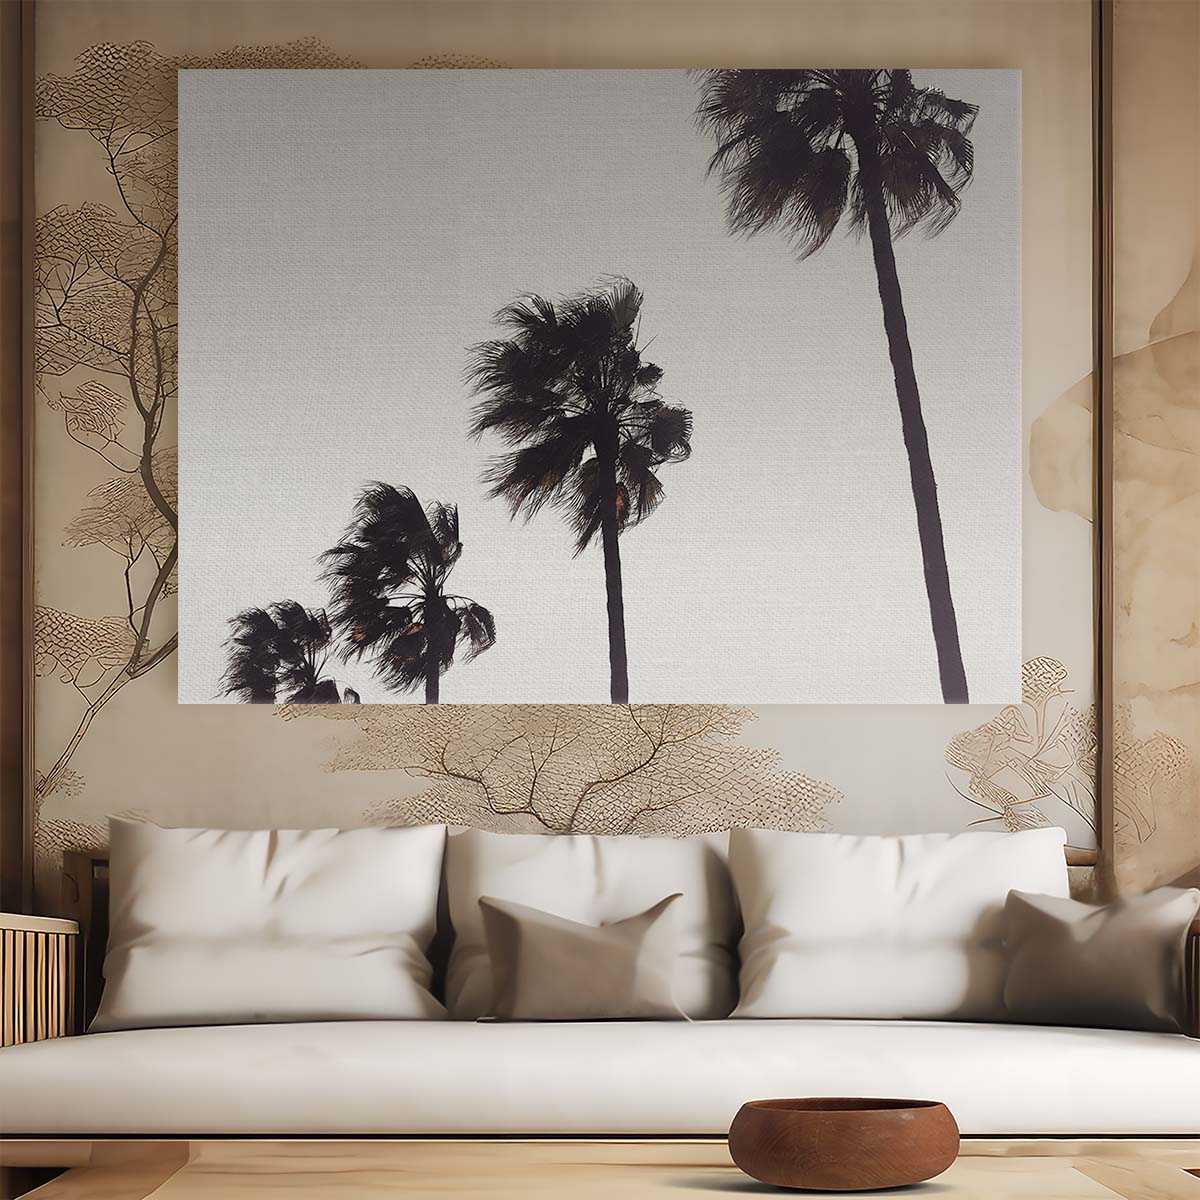 Coastal Paradise Palm Trees Monochrome Landscape Wall Art by Luxuriance Designs. Made in USA.